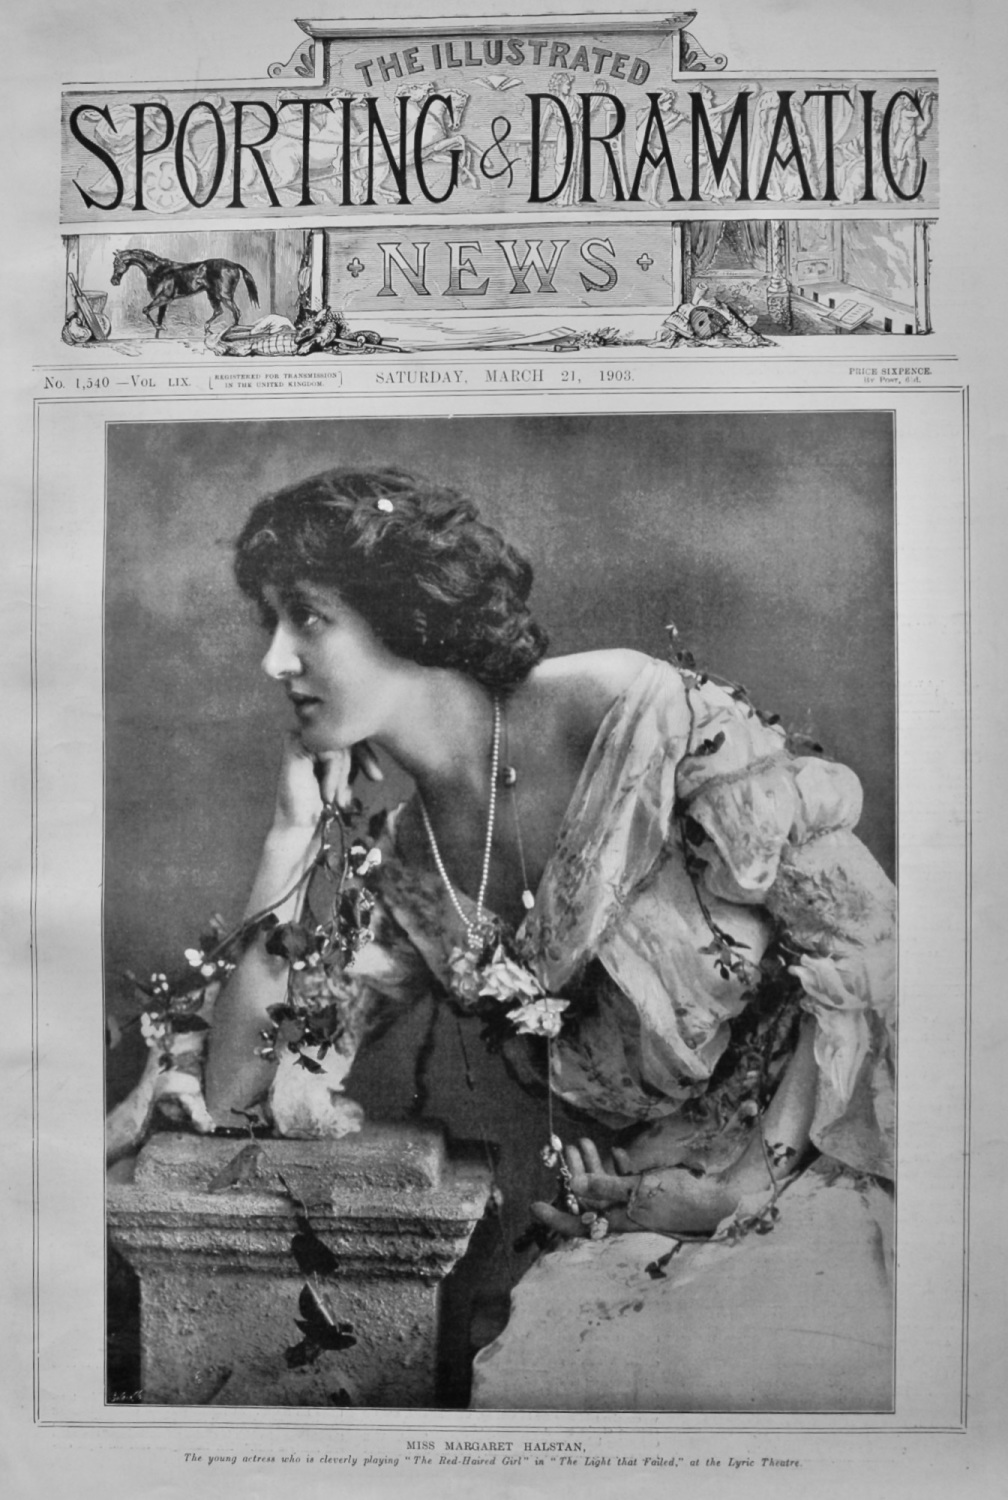 Miss Margaret Halstan, the young actress who is cleverly playing 